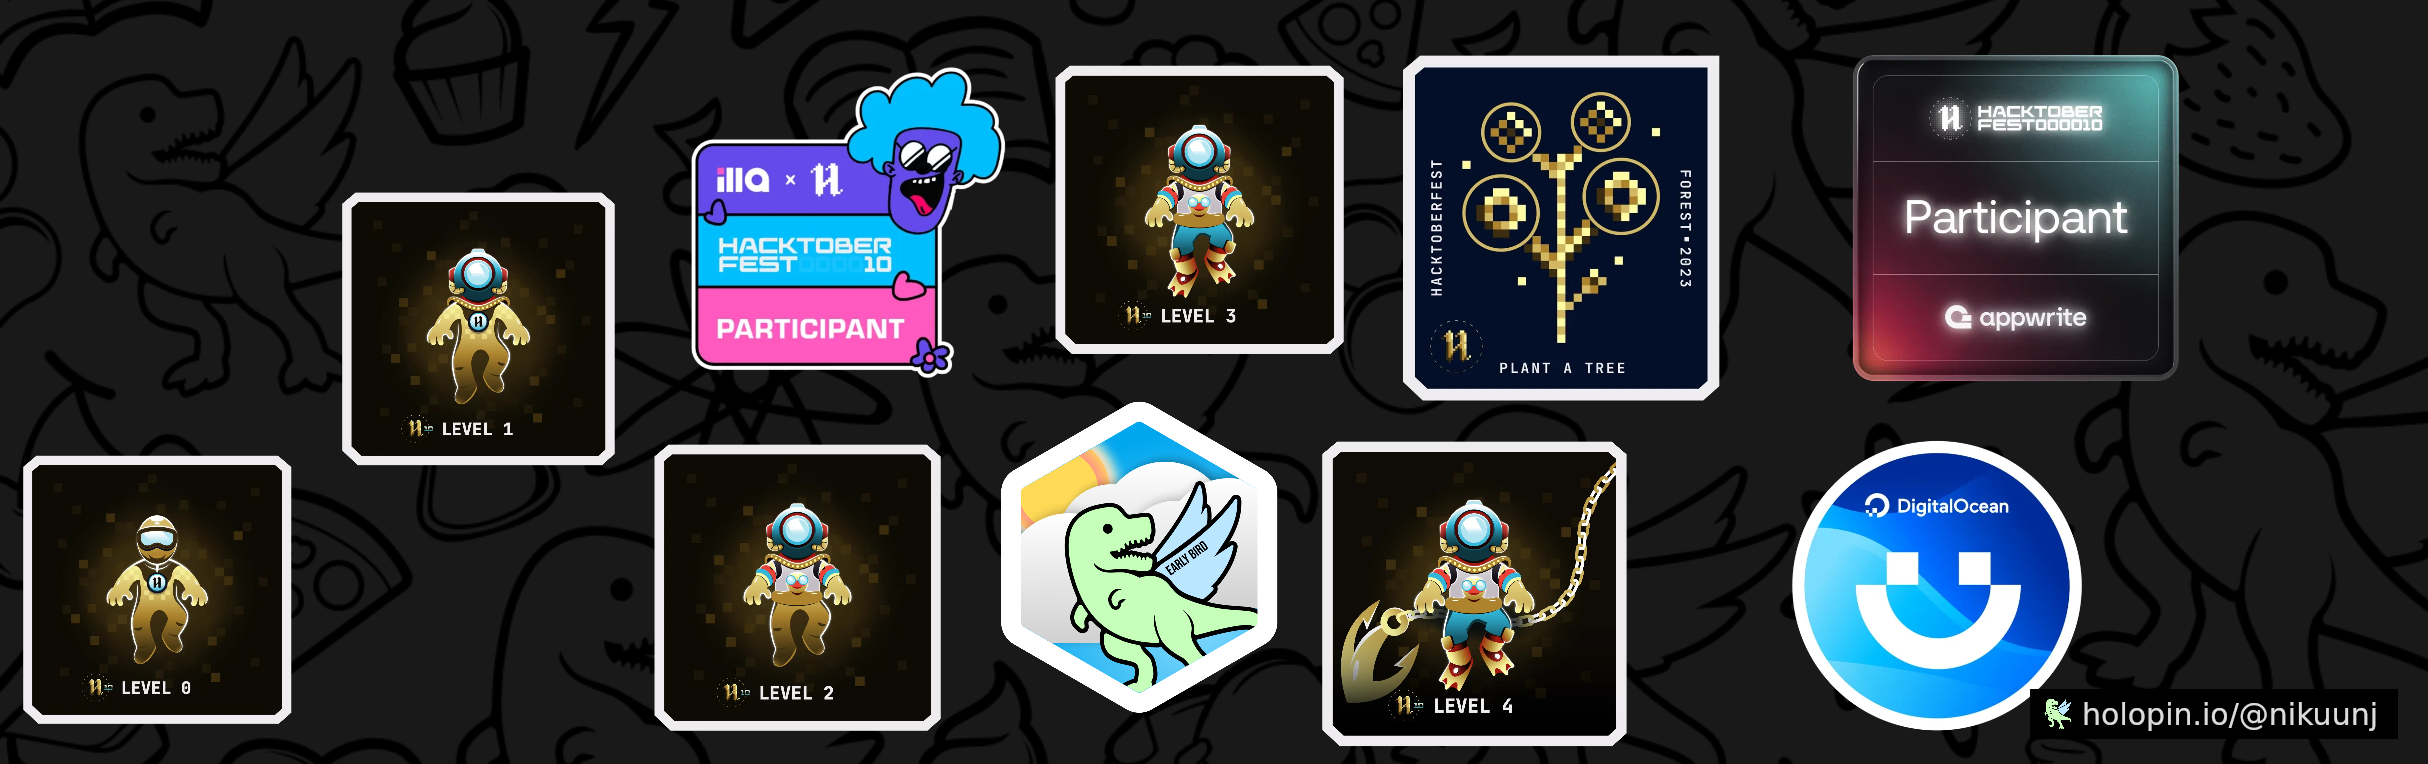 An image of @nikuunj's Holopin badges, which is a link to view their full Holopin profile